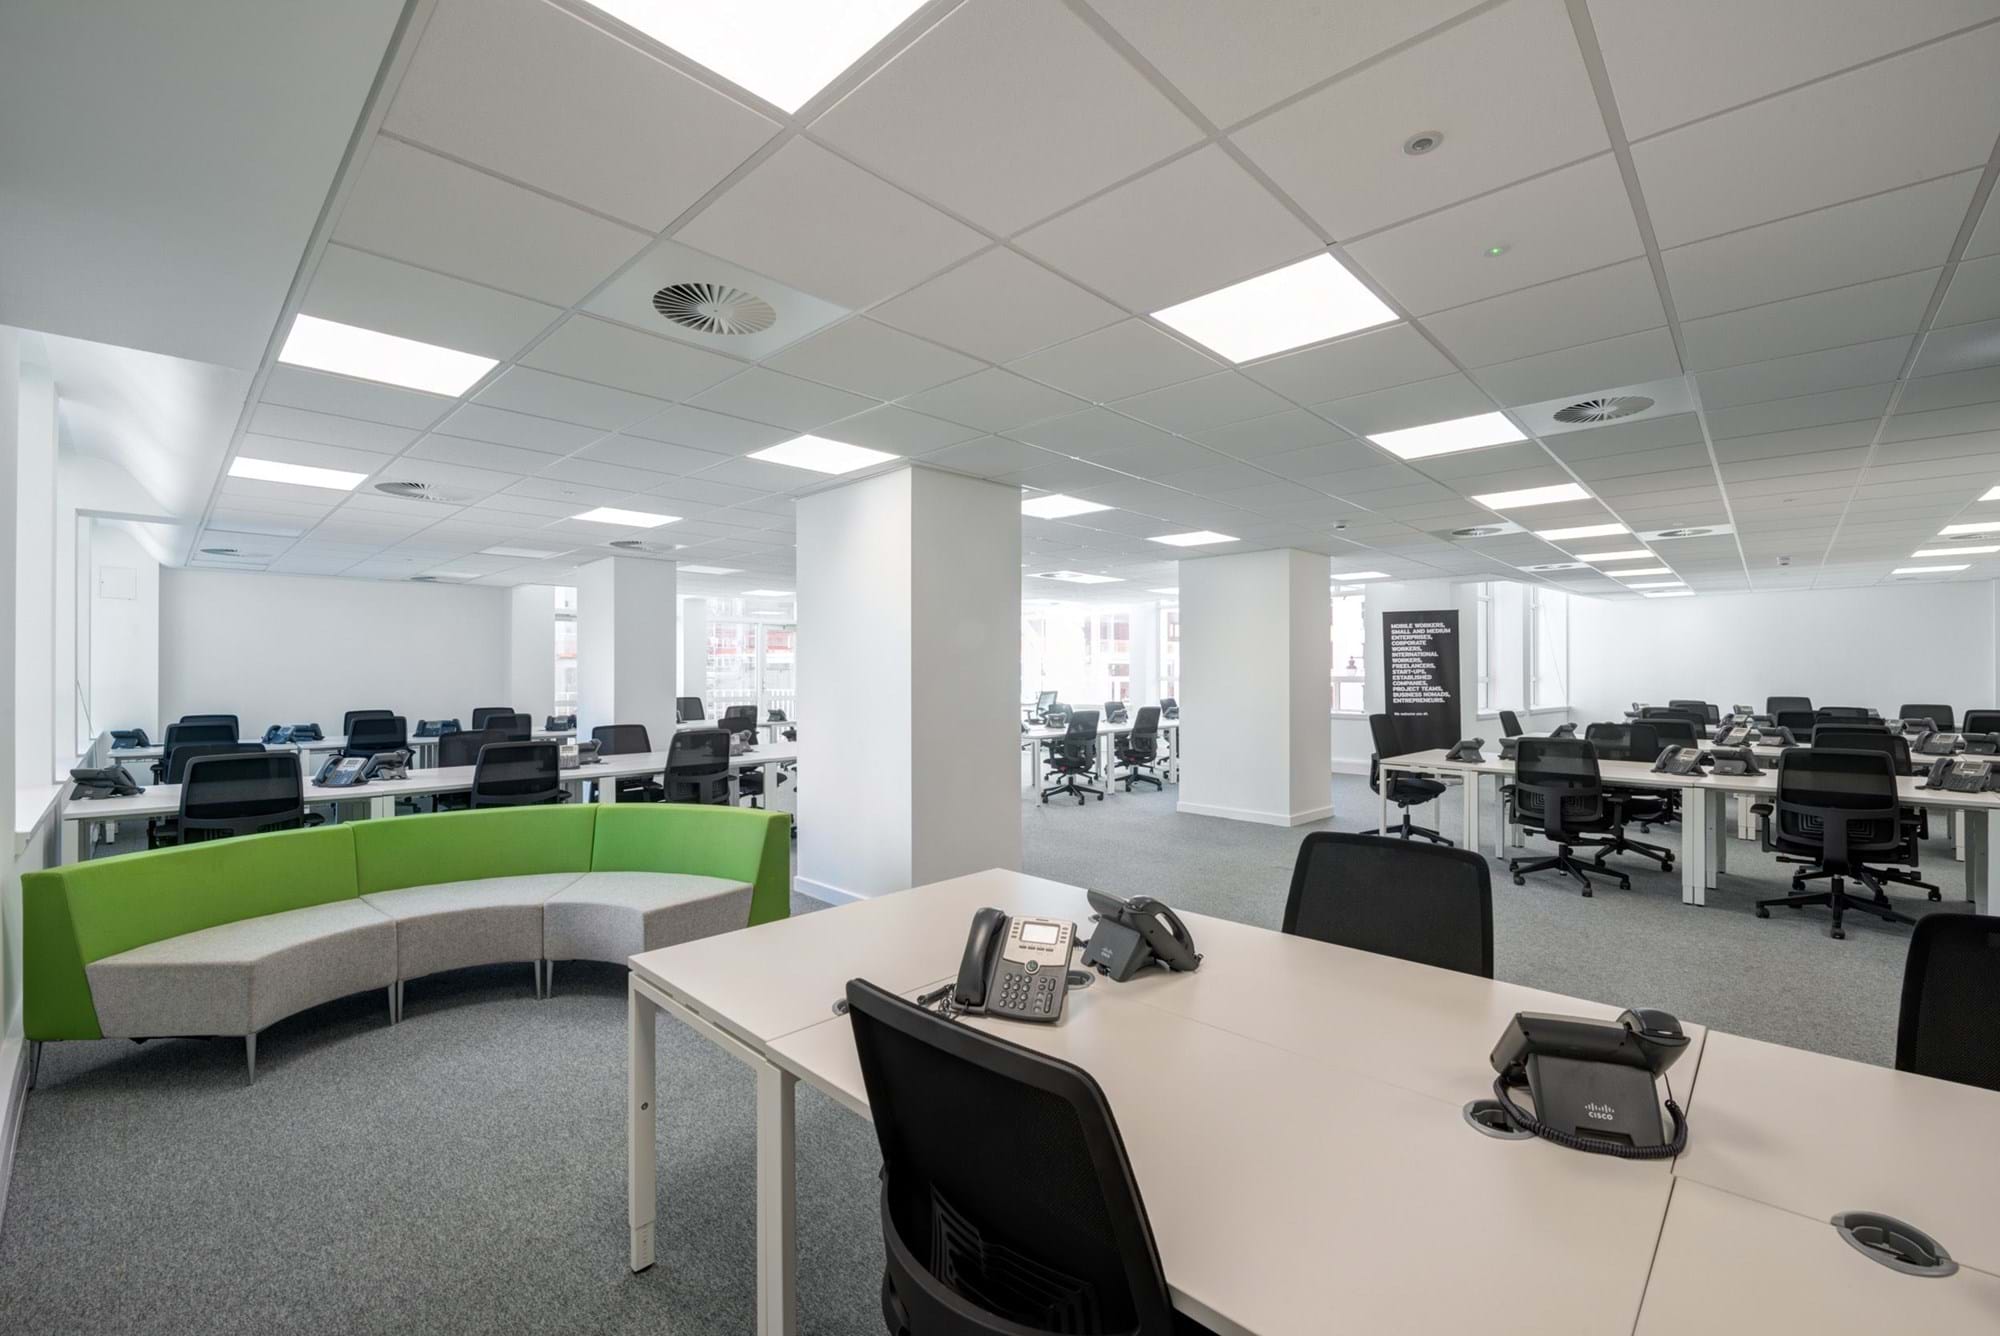 Modus Workspace office design, fit out and refurbishment - Spaces - Peter House, Manchester - Spaces Peter House 53 highres sRGB.jpg